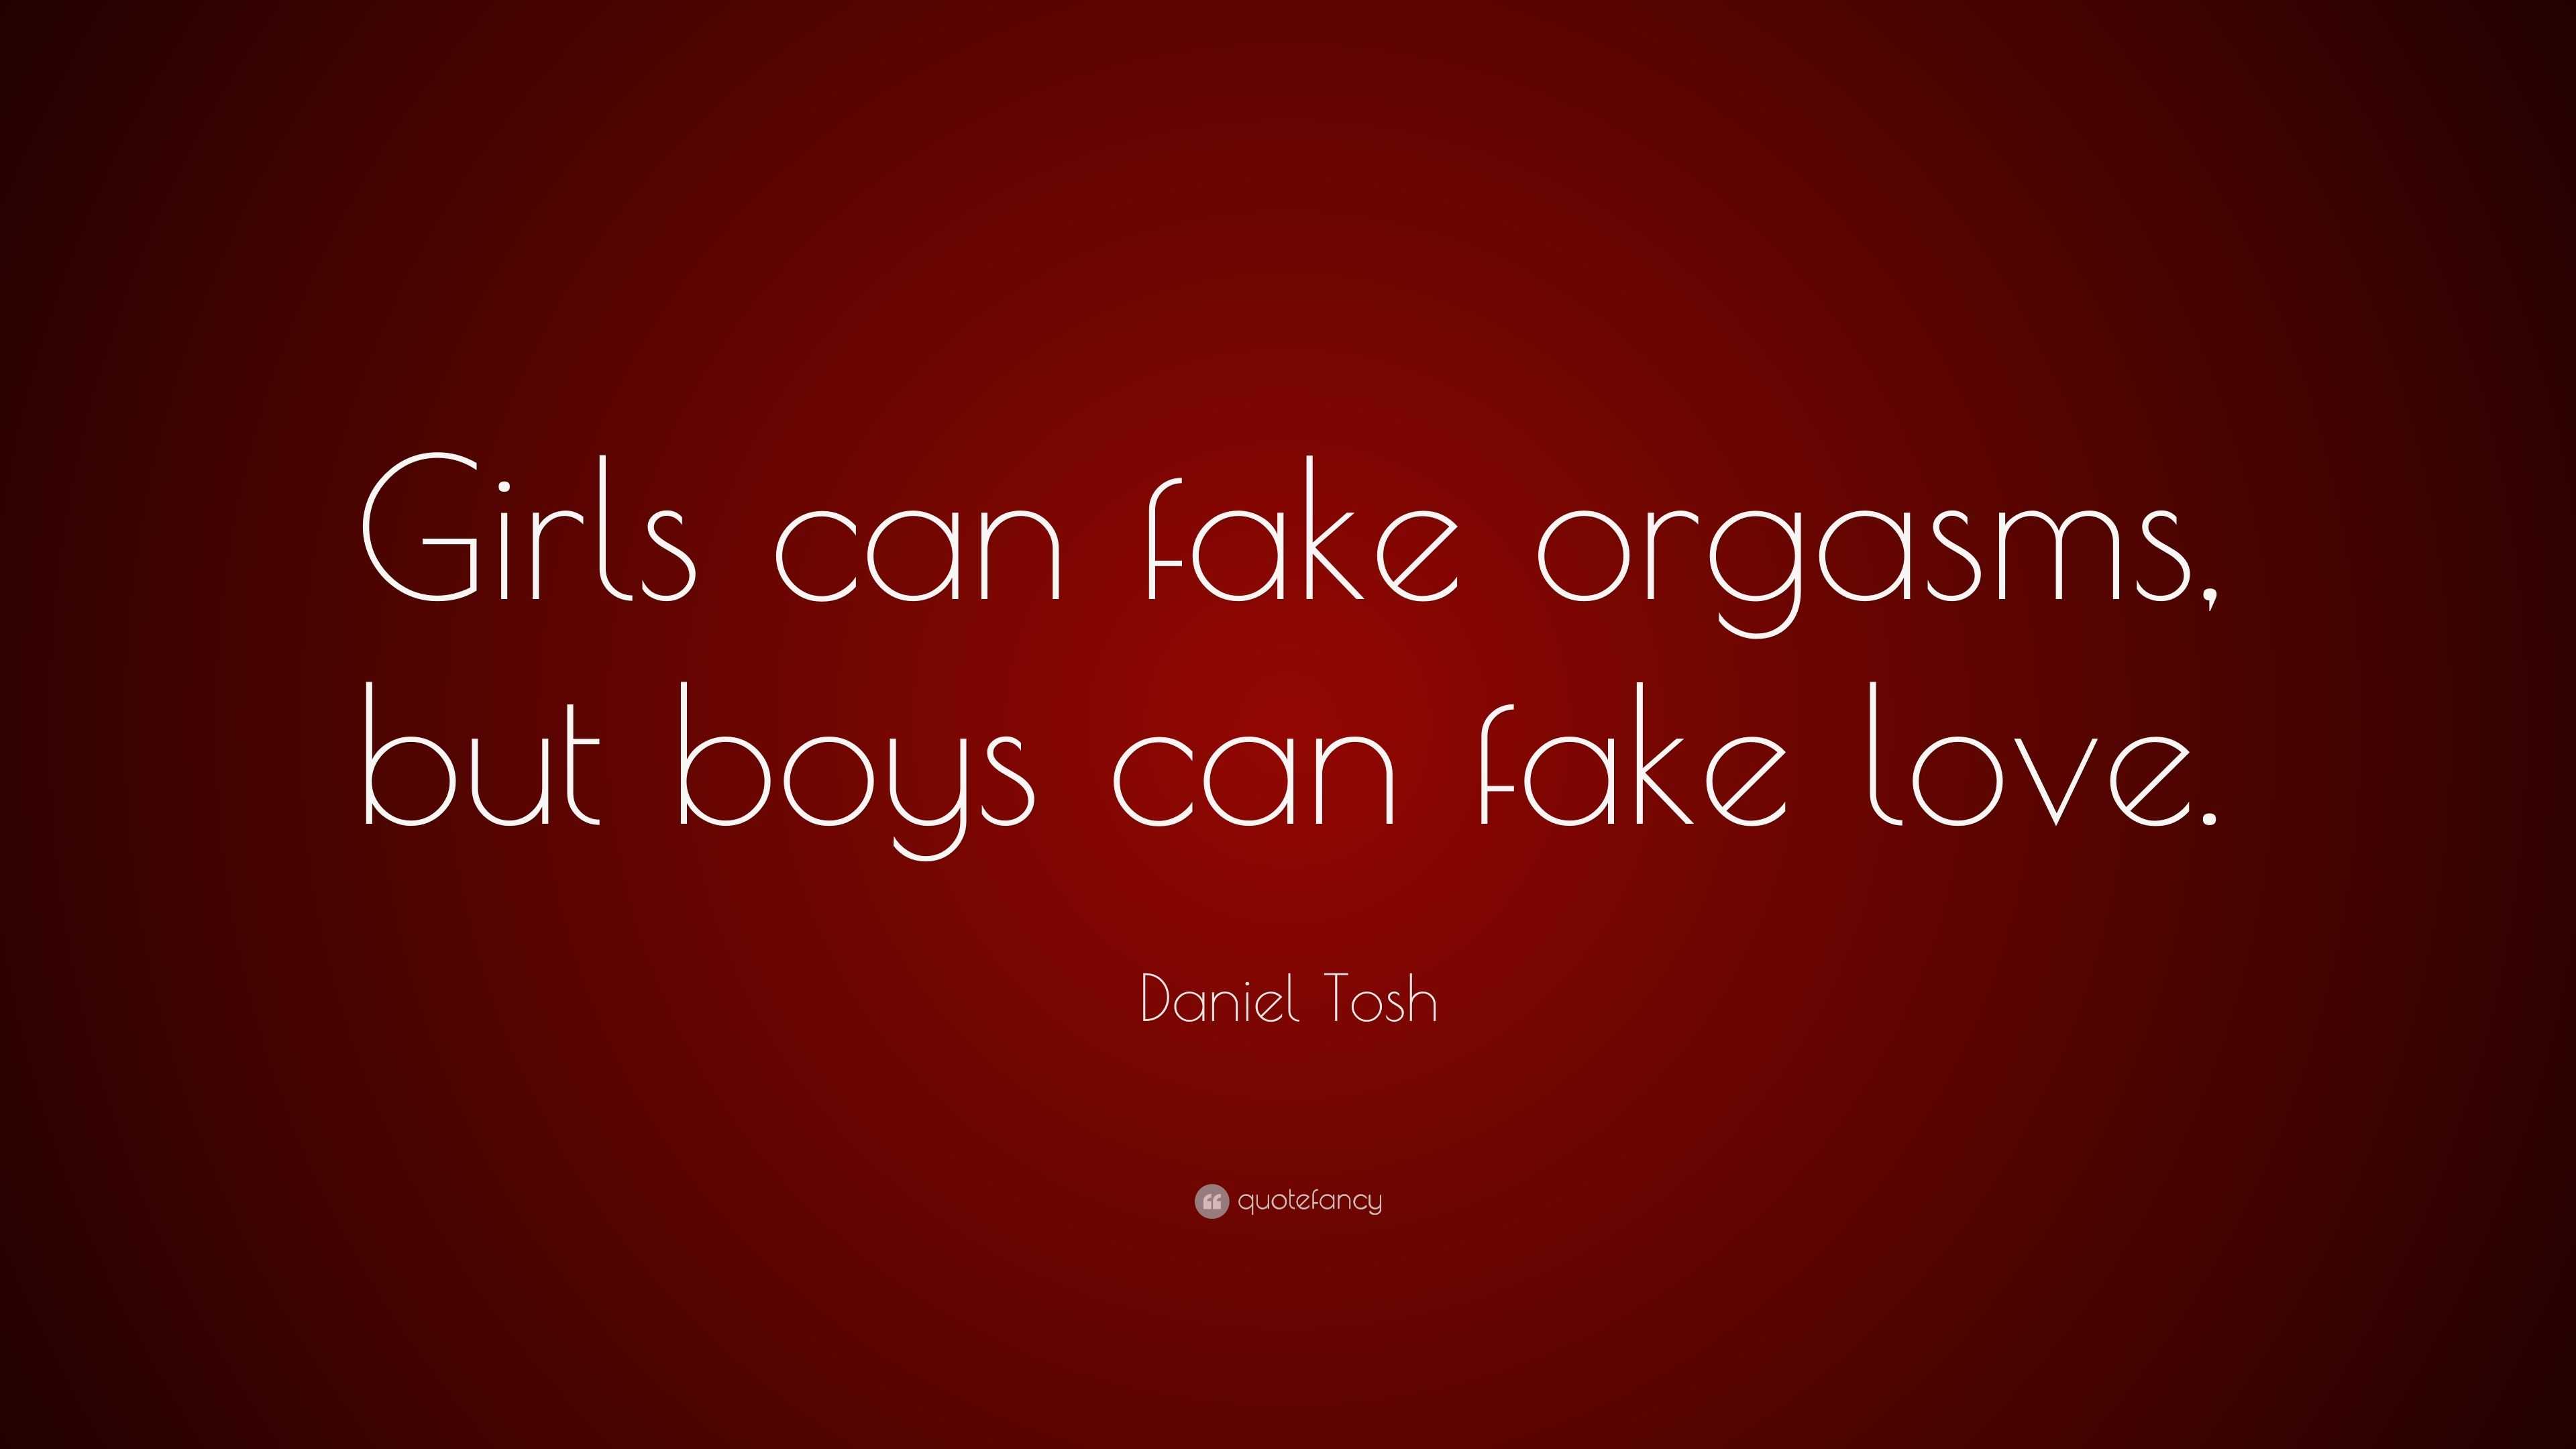 Daniel Tosh Quote “Girls can fake orgasms but boys can fake love